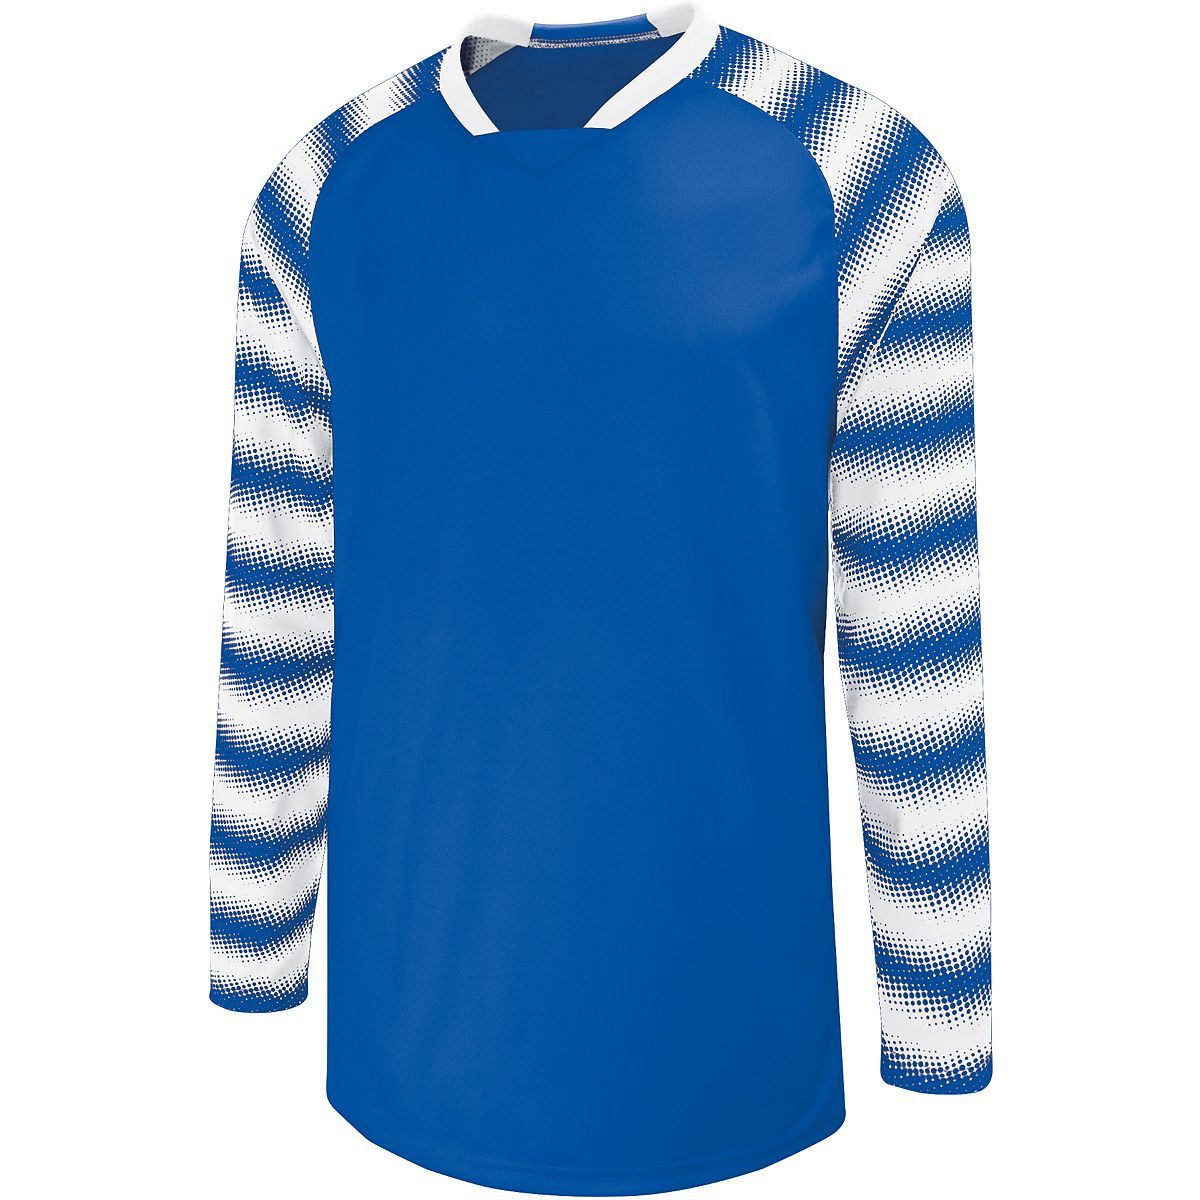 High 5 Youth Prism Goalkeeper Jersey in Royal/White  -Part of the Youth, Youth-Jersey, High5-Products, Soccer, Shirts, All-Sports-1 product lines at KanaleyCreations.com